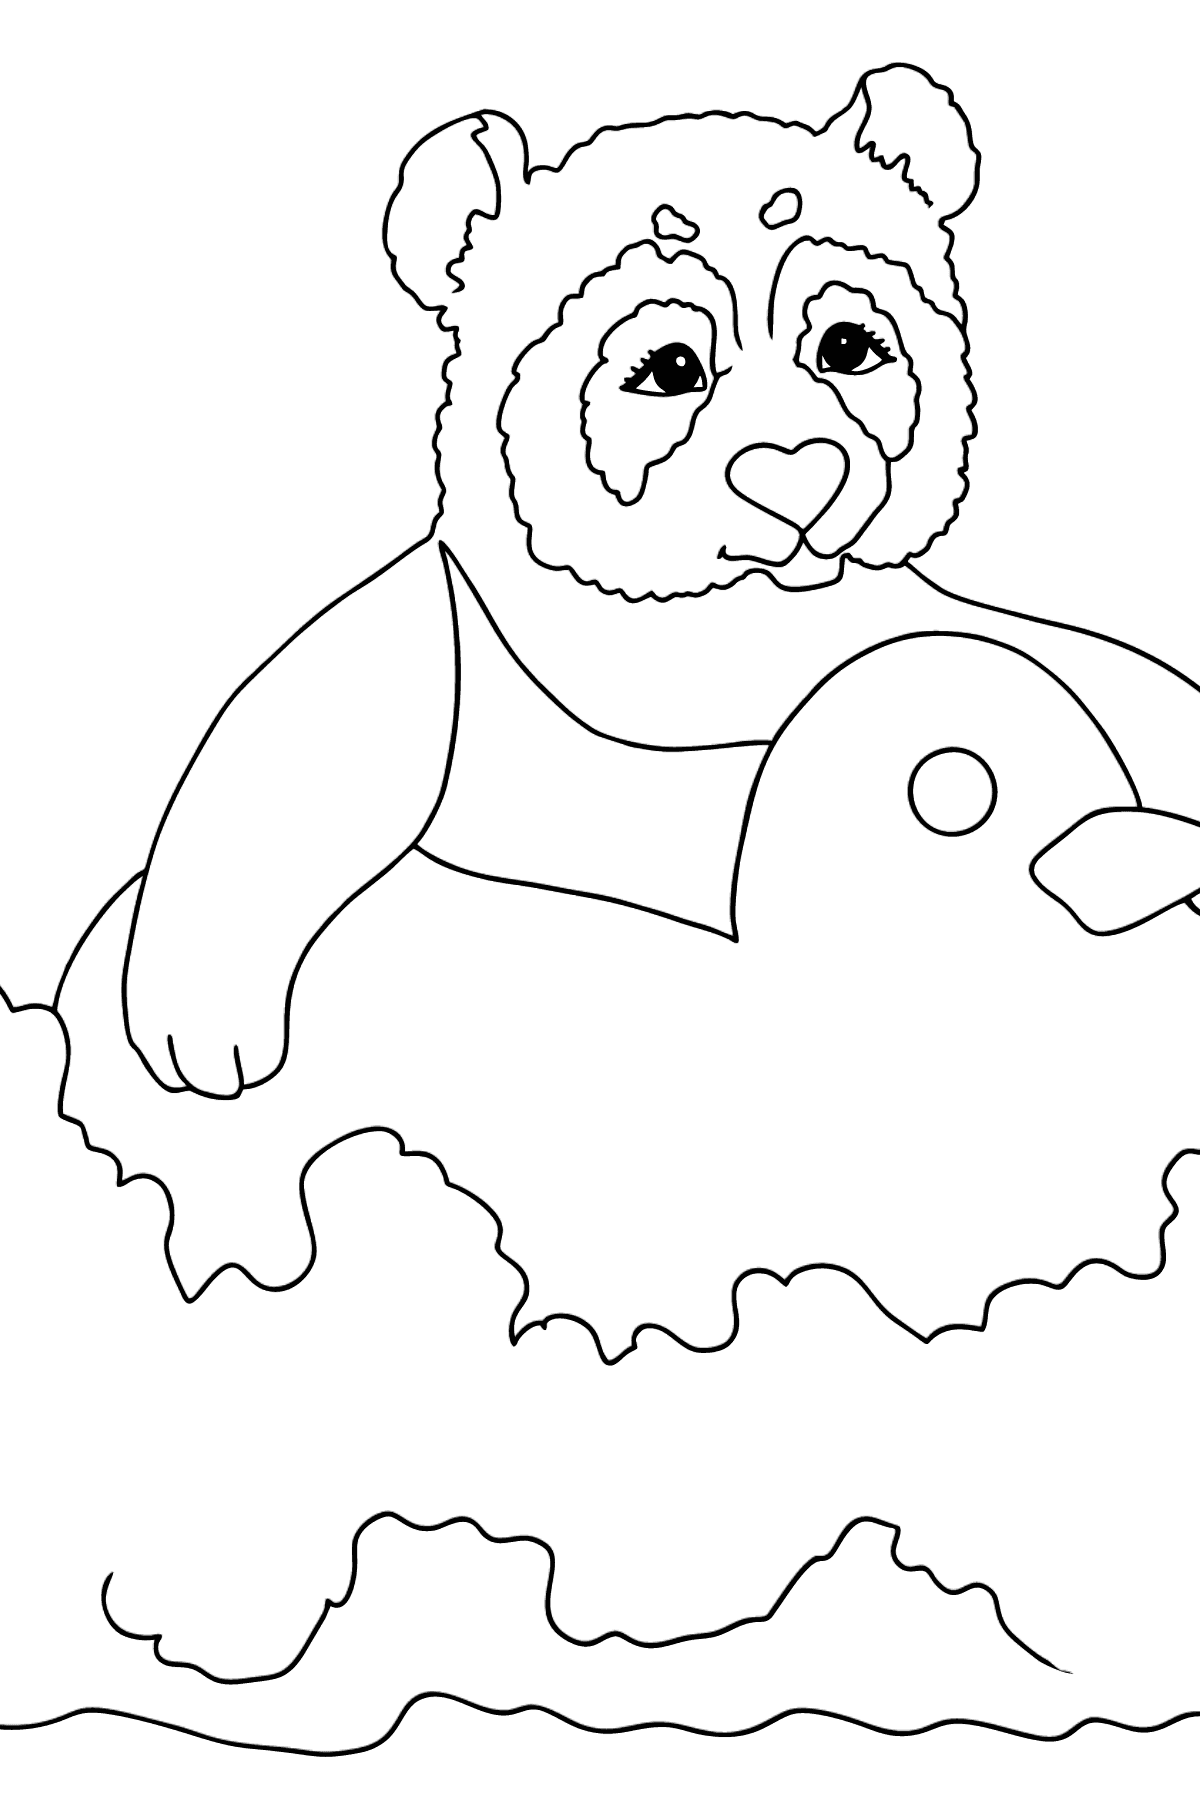 Amusing Panda (Simple) coloring page - Coloring Pages for Kids